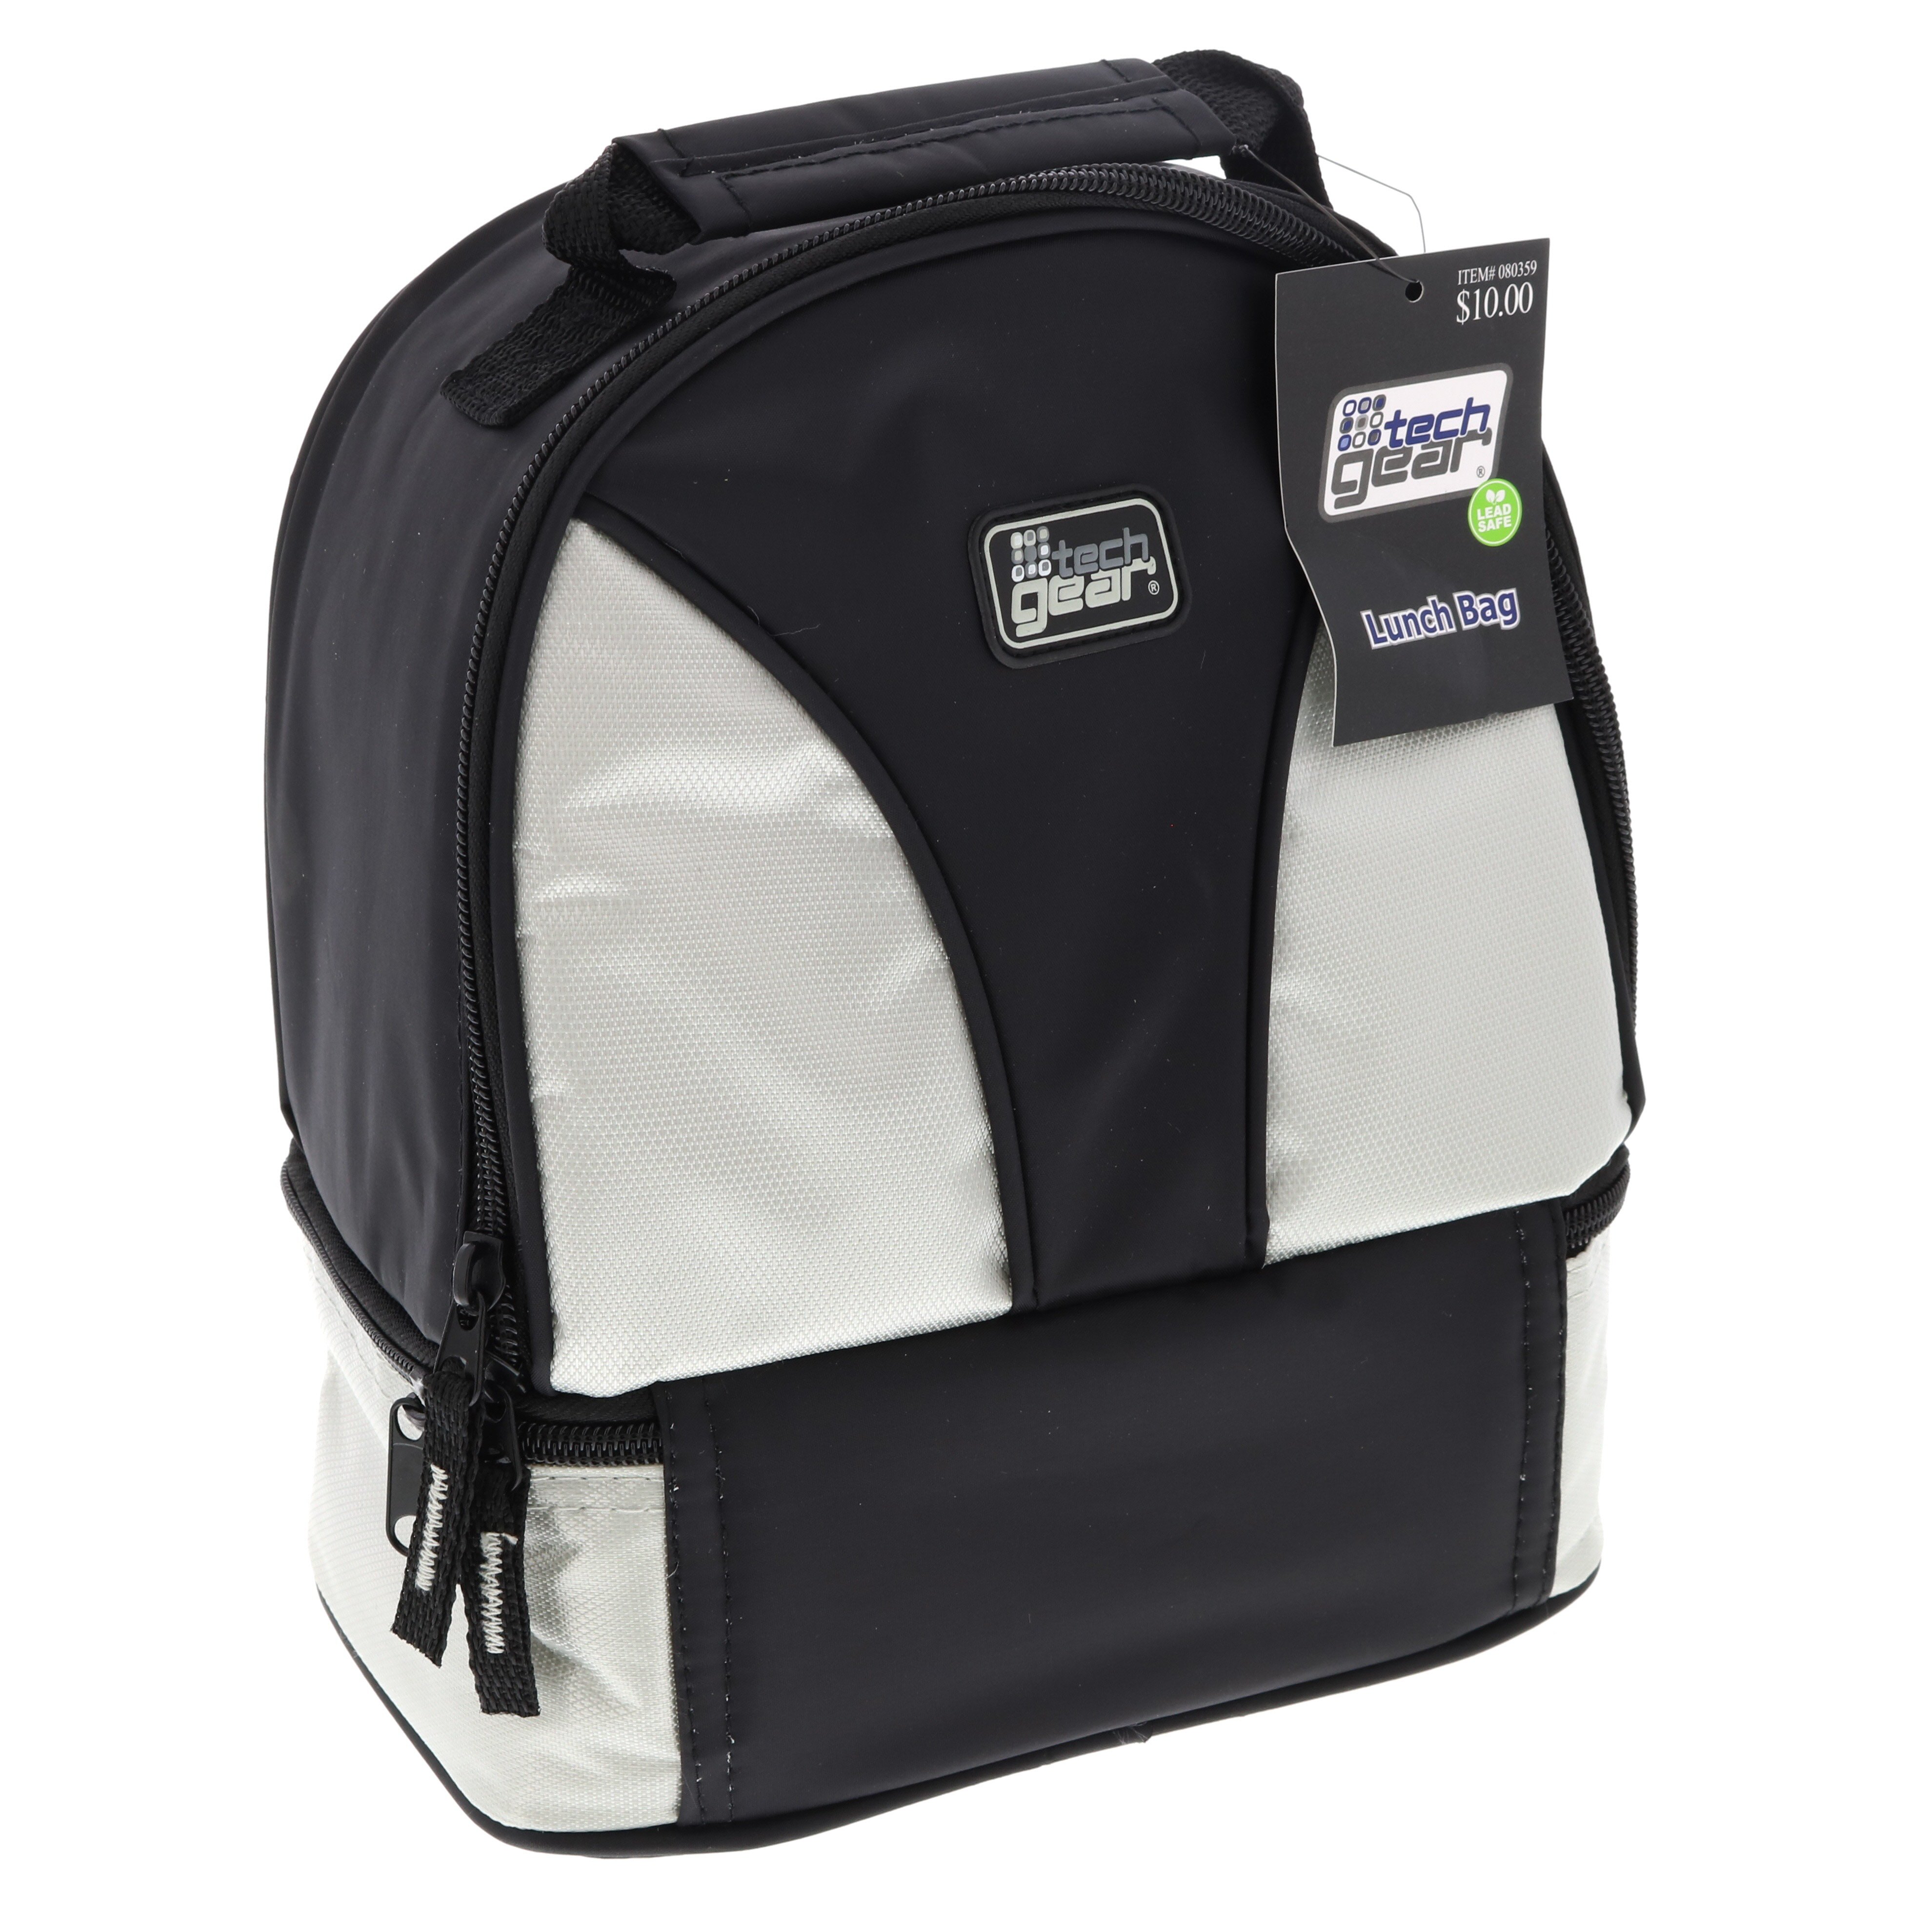 2 compartment lunch bag